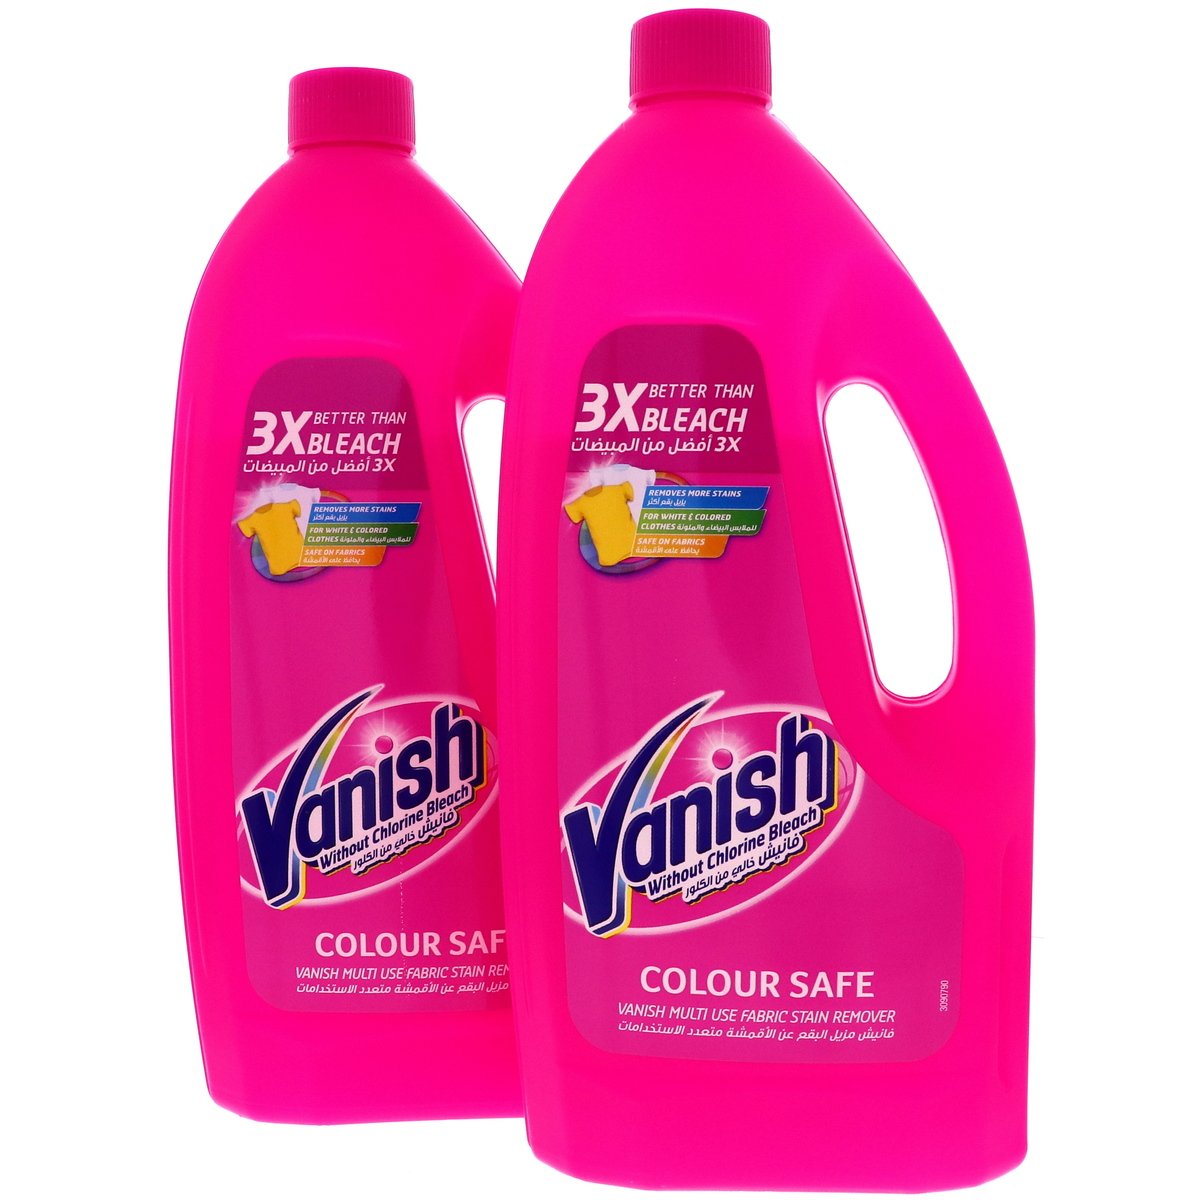 Vanish Colour Safe Fabric Stain Remover 2 x 900ml